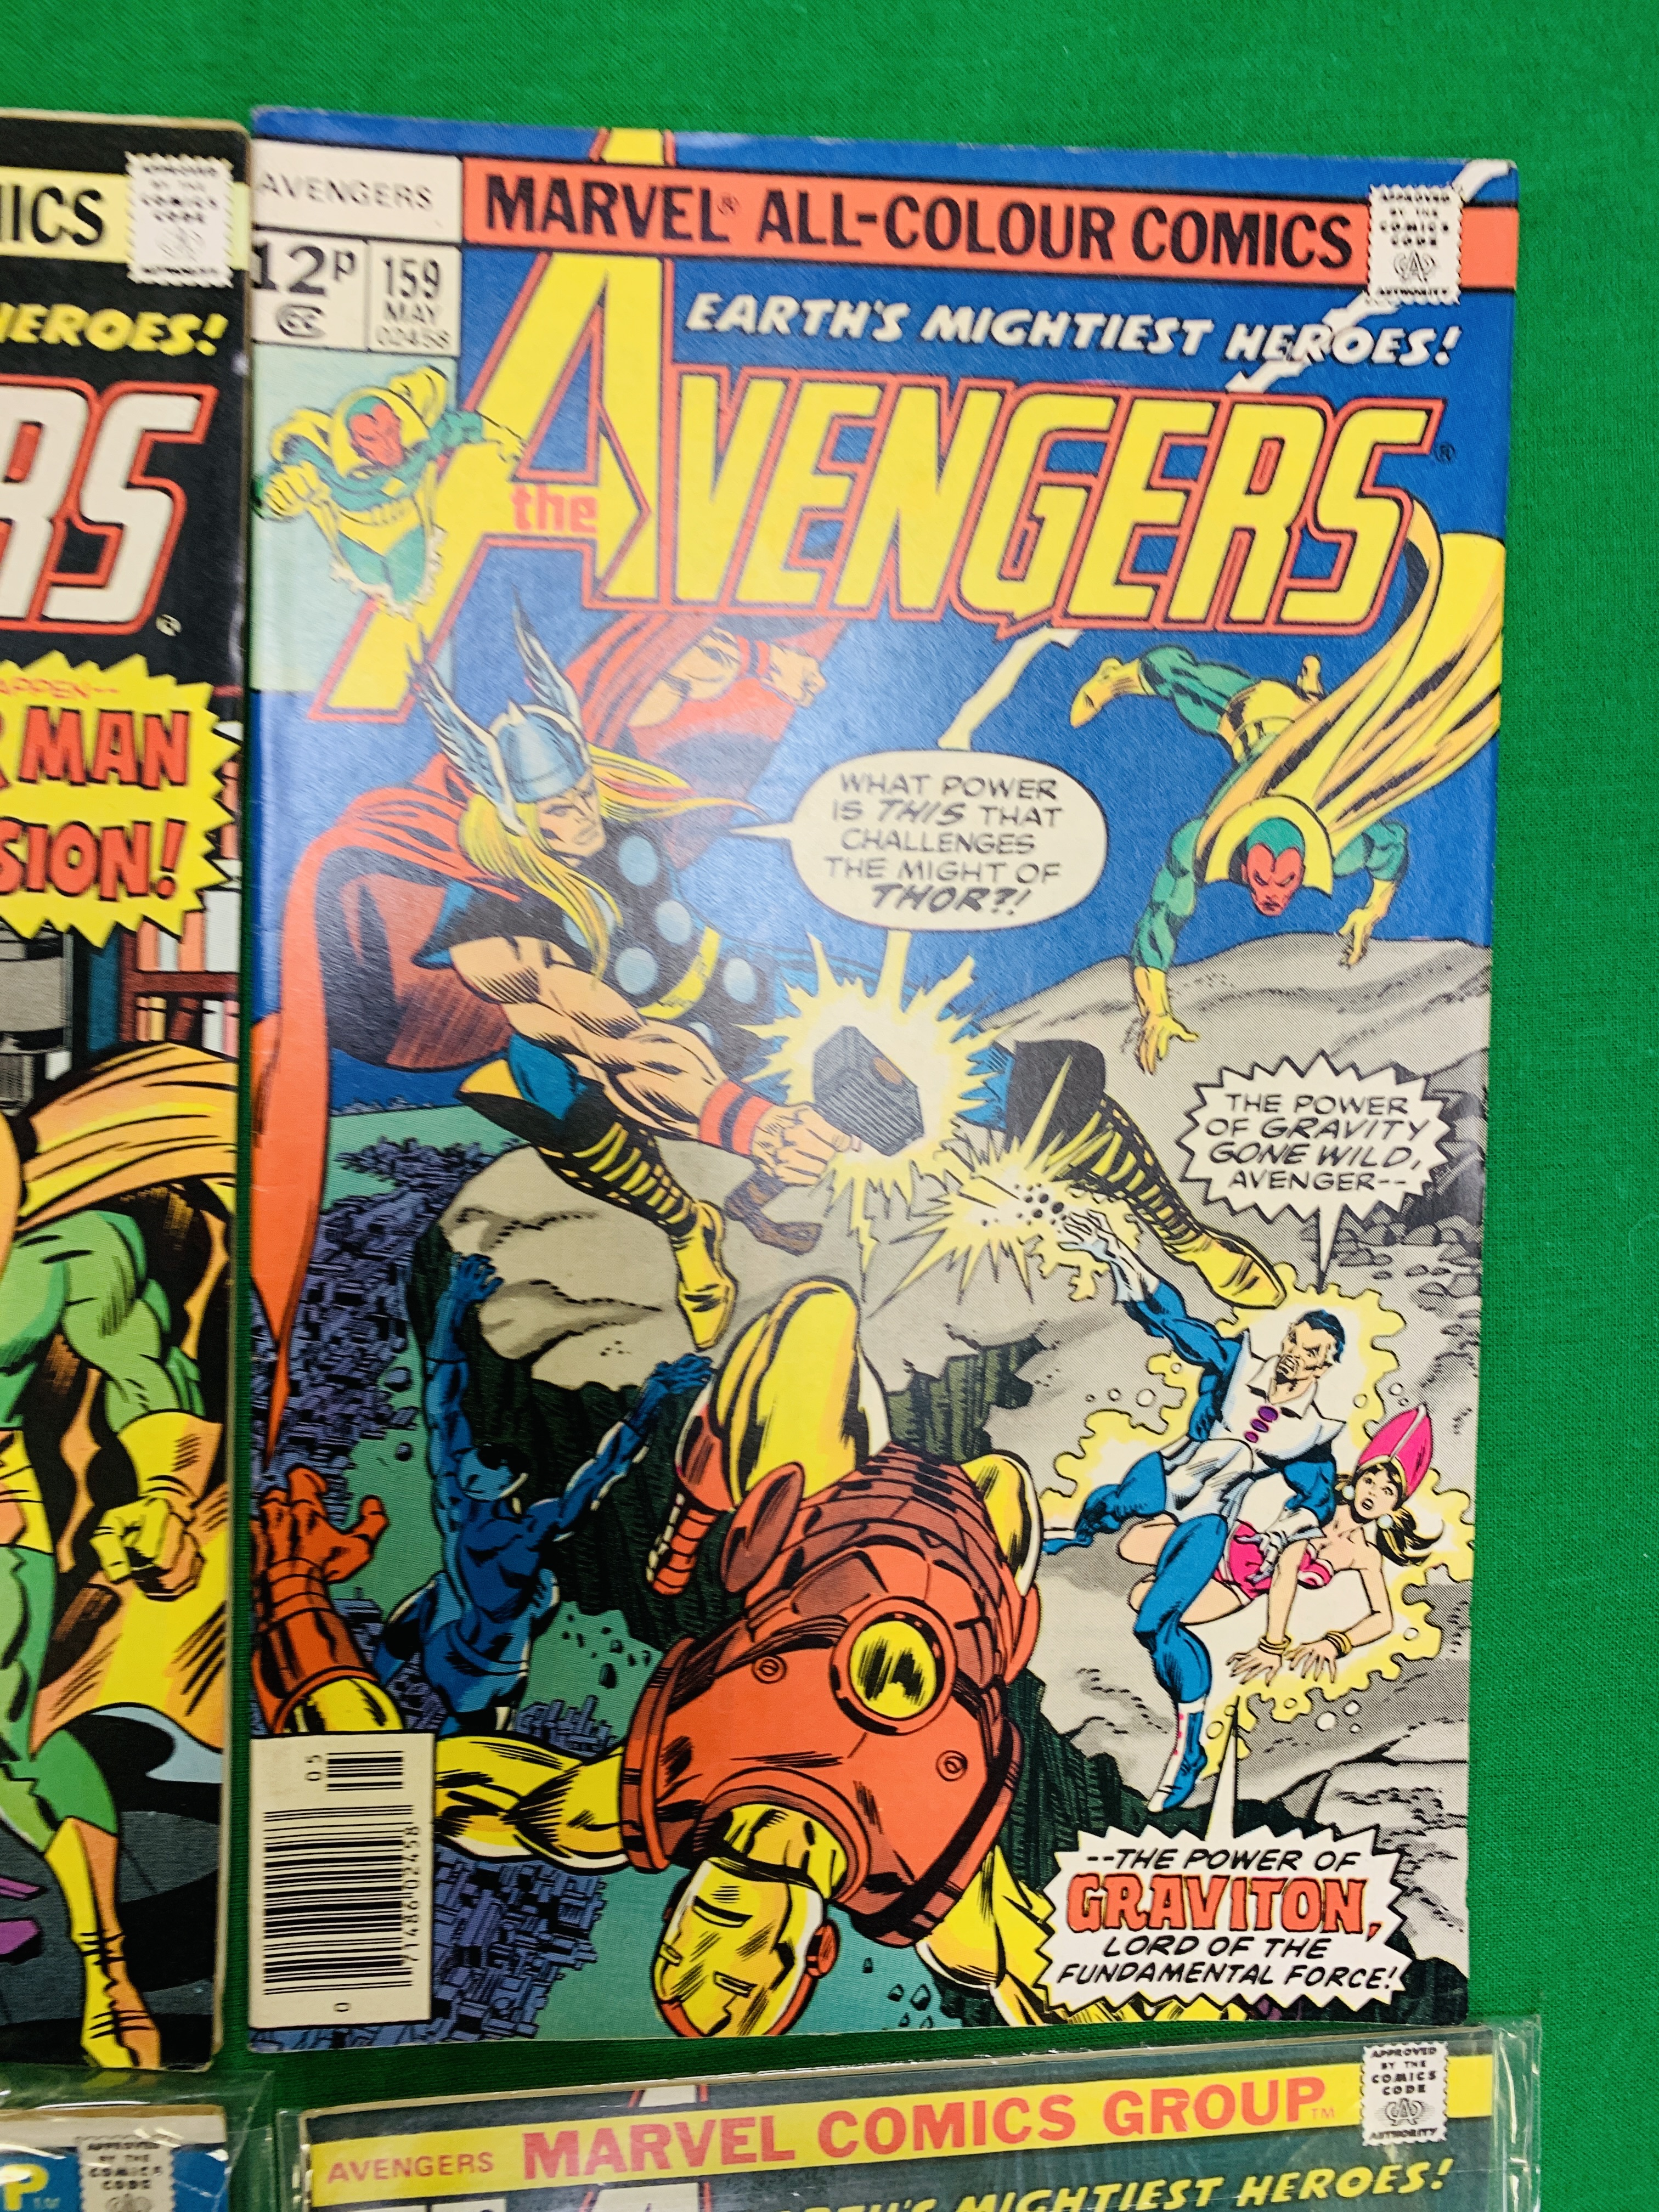 MARVEL COMICS THE AVENGERS NO. 101 - 299, MISSING ISSUES 103 AND 110. - Image 39 of 130